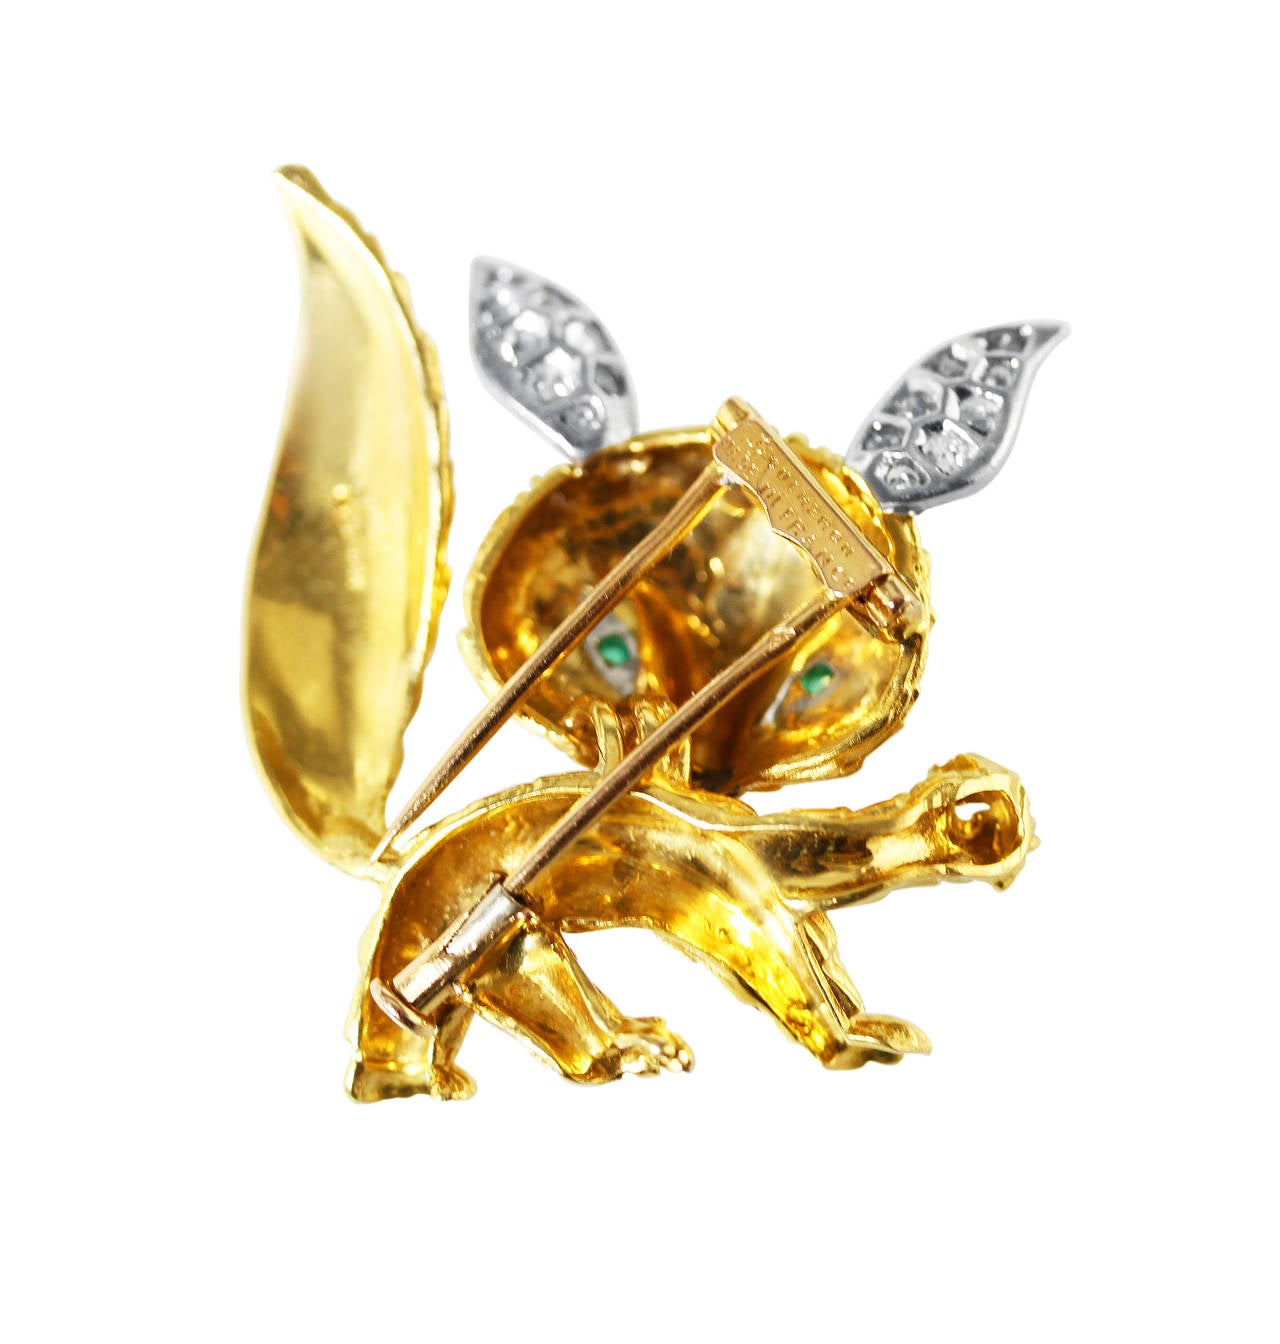 A whimsical 18 karat yellow and white gold, diamond and emerald fox pin by Boucheron, France, the fox with cabochon emerald eyes and ears set with 16 round diamonds weighing approximately 0.35 carat, gross weight 13.8 grams, signed Boucheron, Made